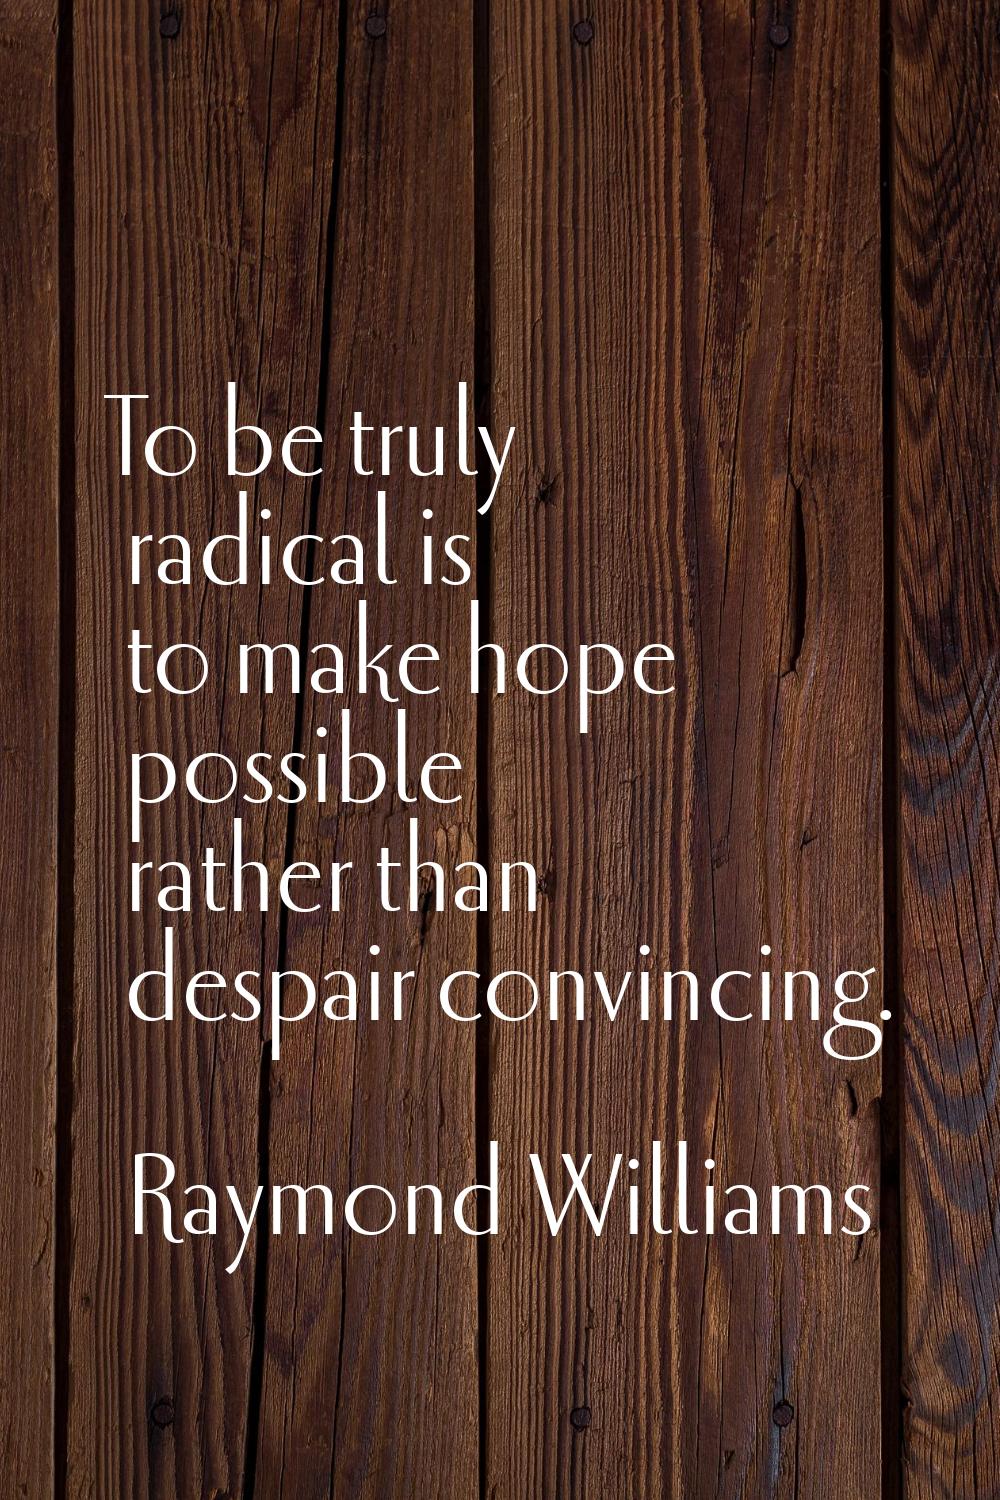 To be truly radical is to make hope possible rather than despair convincing.